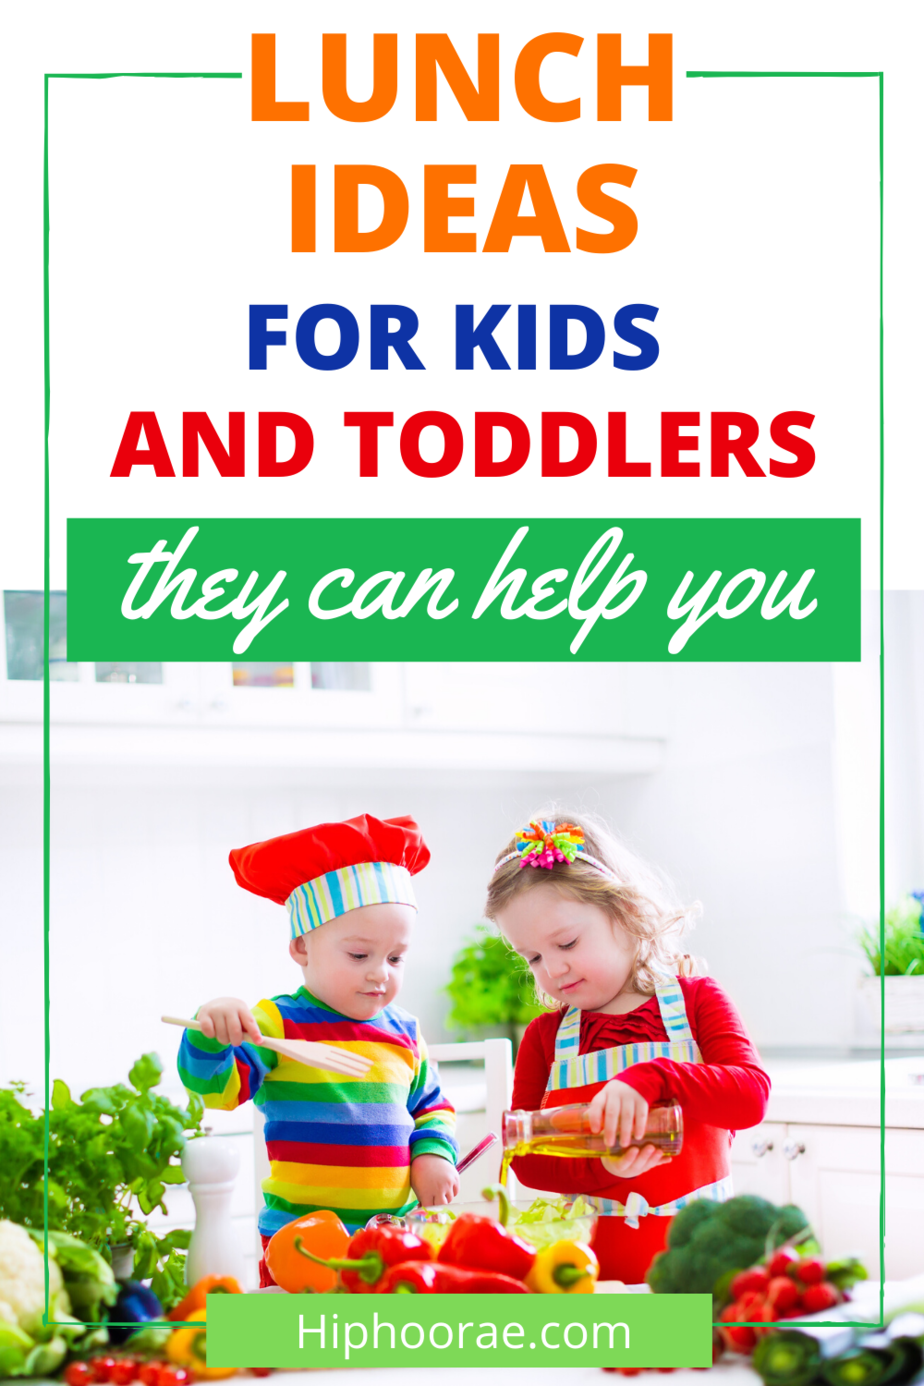 Lunch Ideas for kids and toddlers